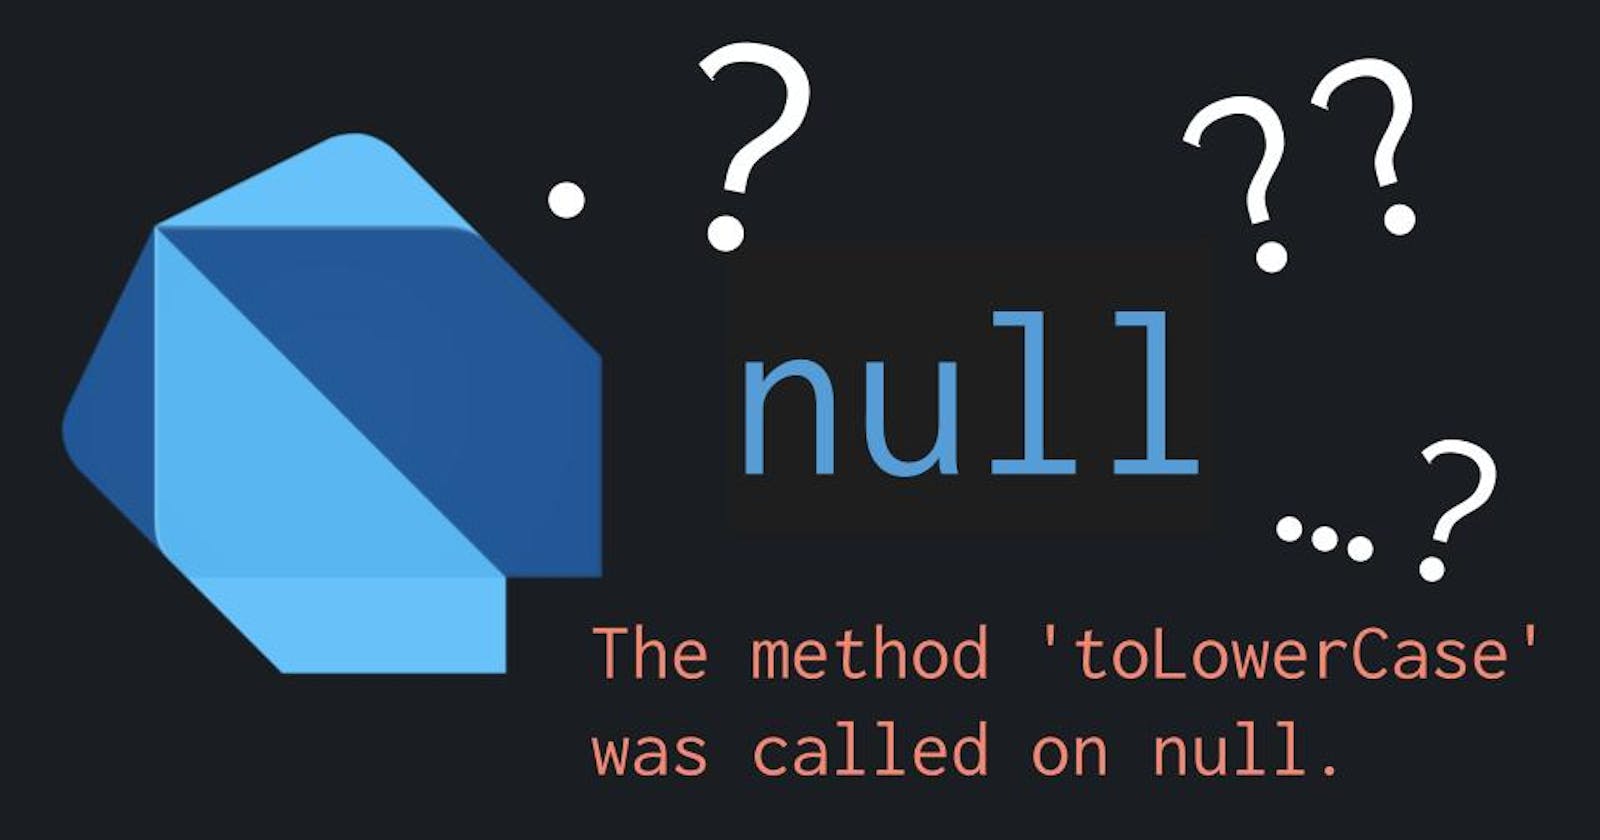 Dealing with nulls in Dart